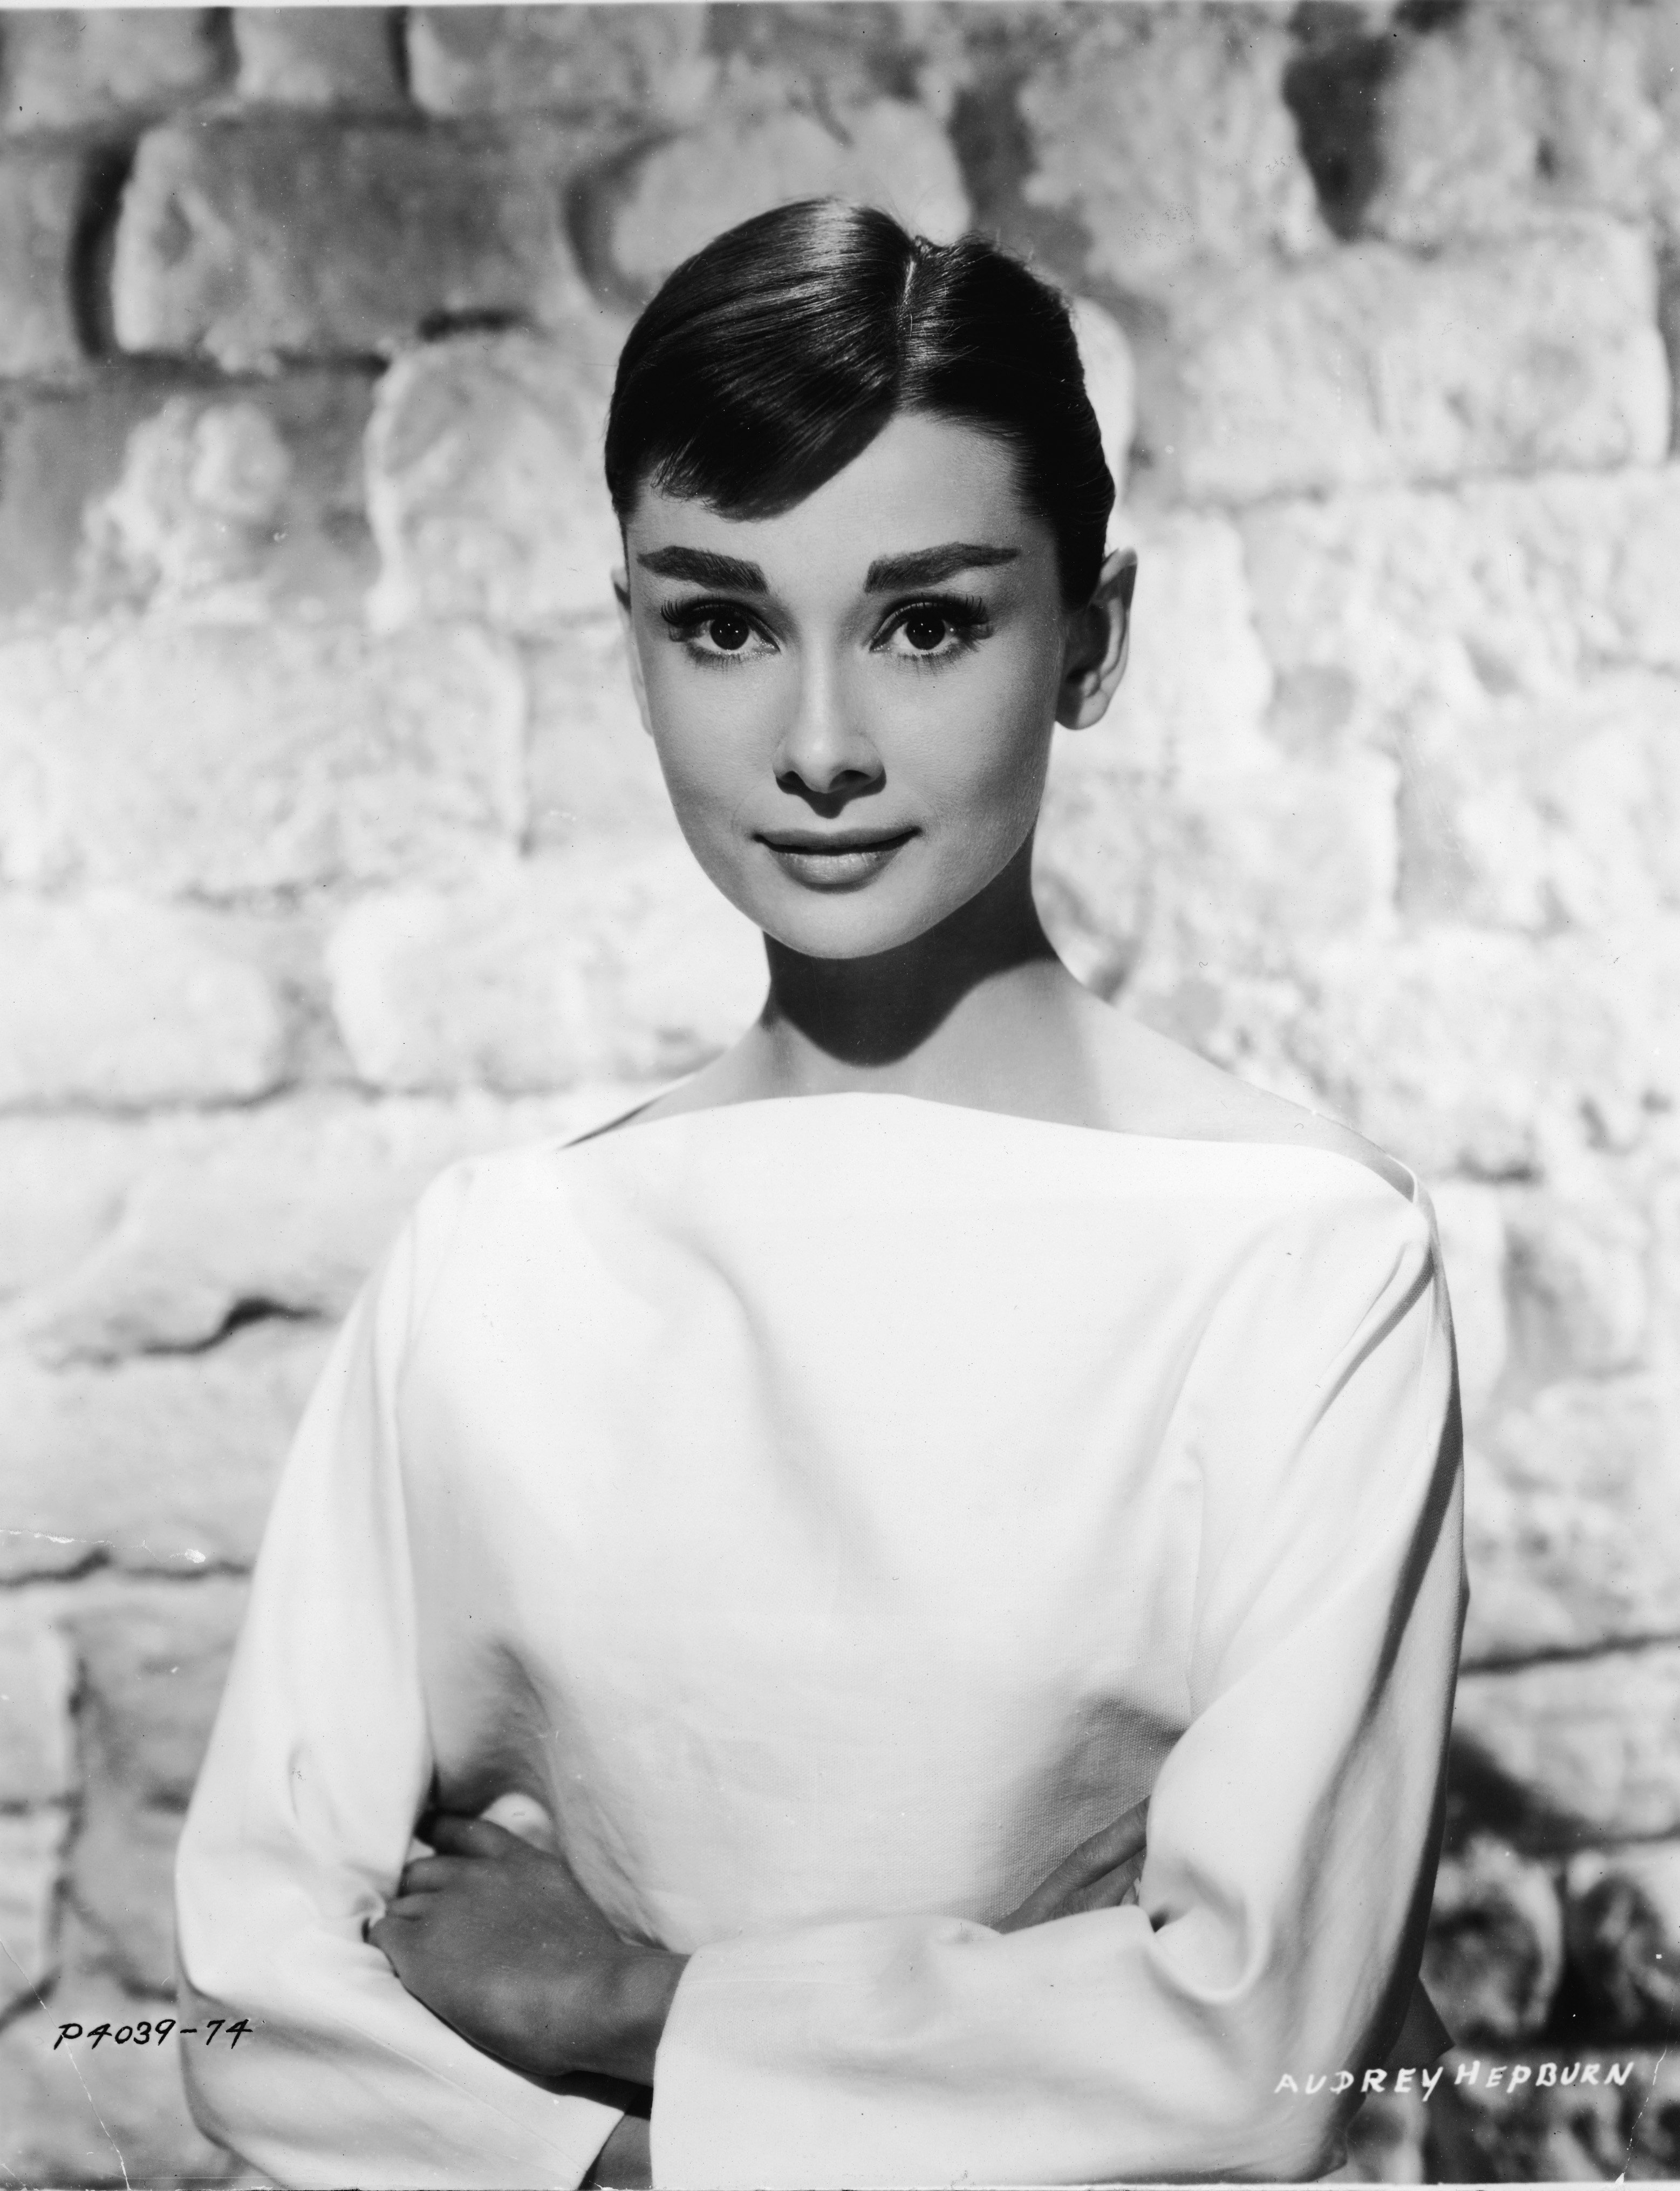 Audrey Hepburn, May 12. 1907 l Image: Getty Images 